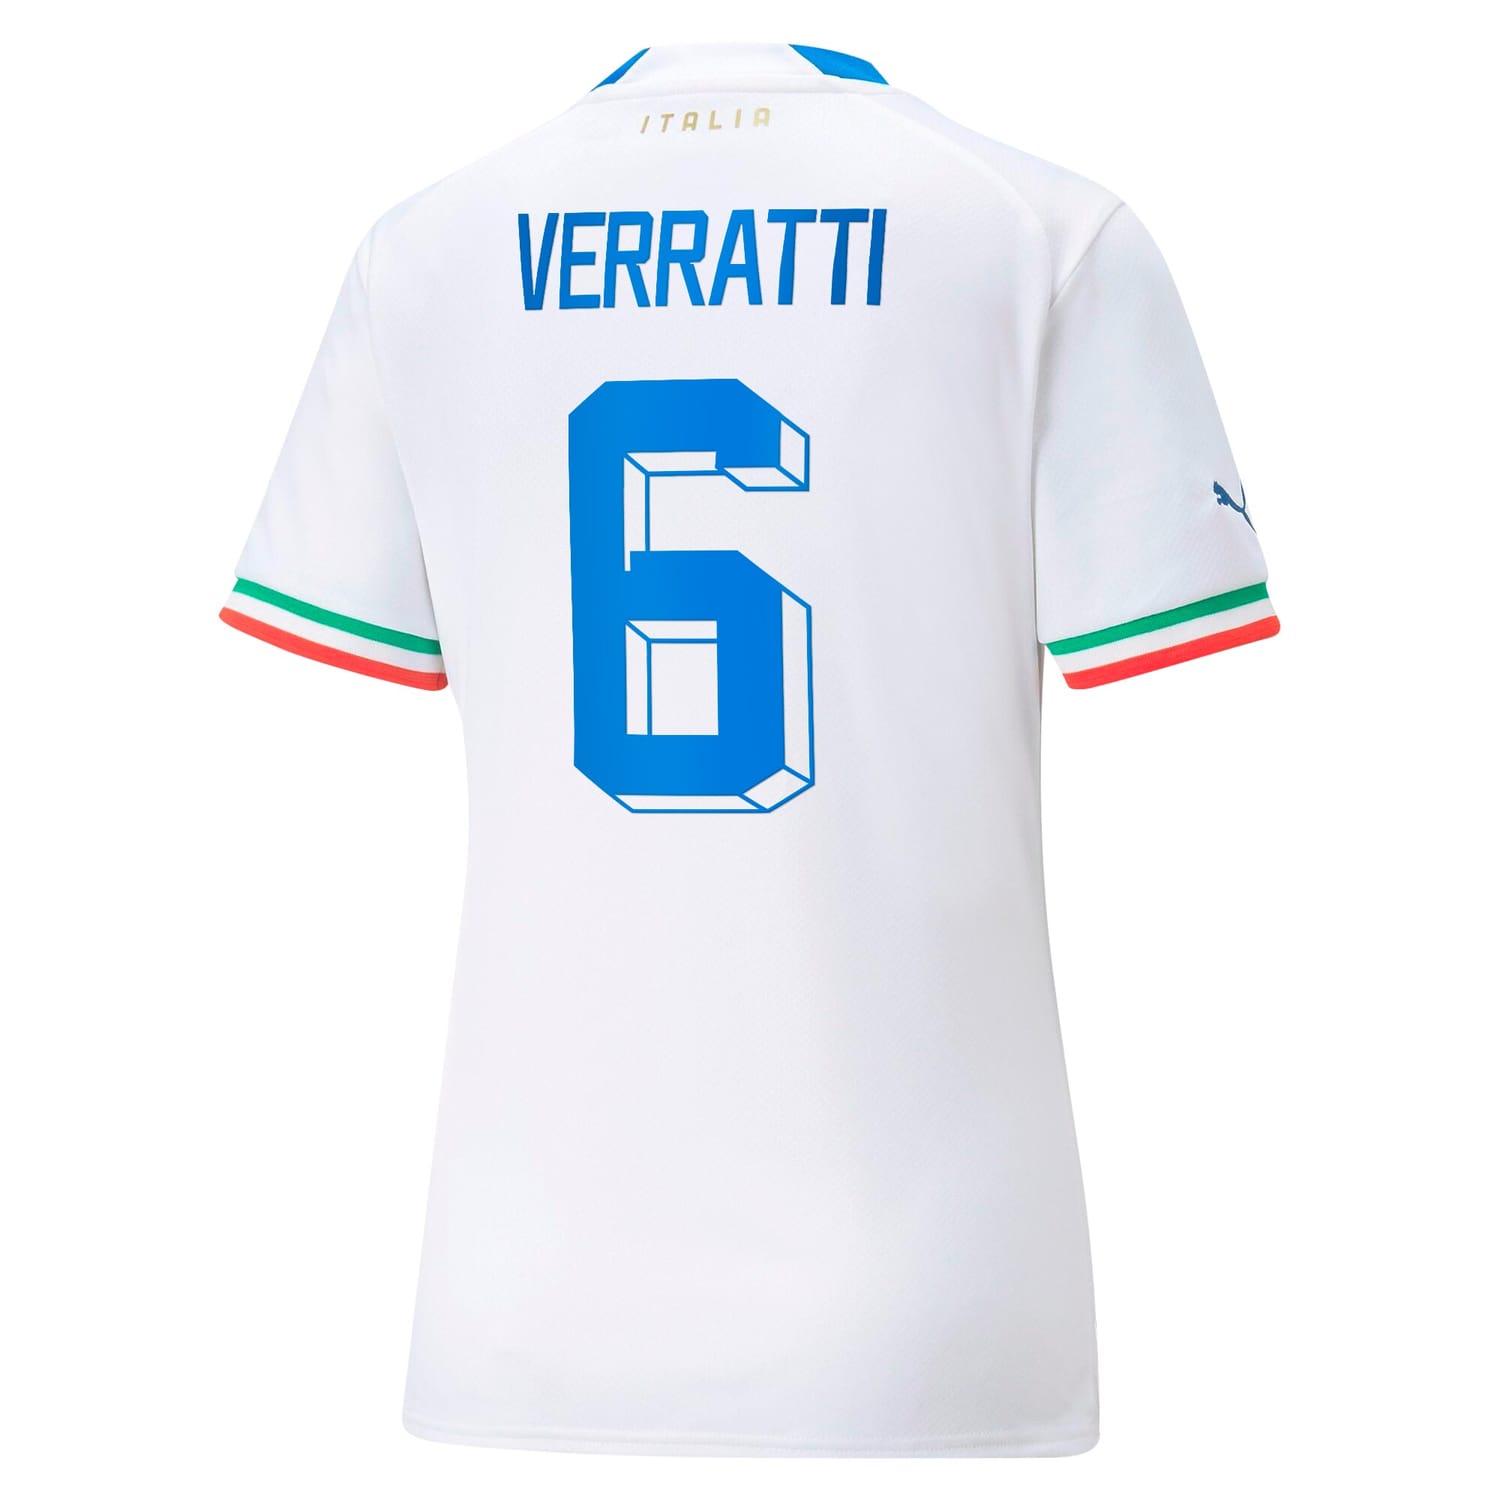 Italy National Team Away Jersey Shirt White 2022-23 player Marco Verratti printing for Women